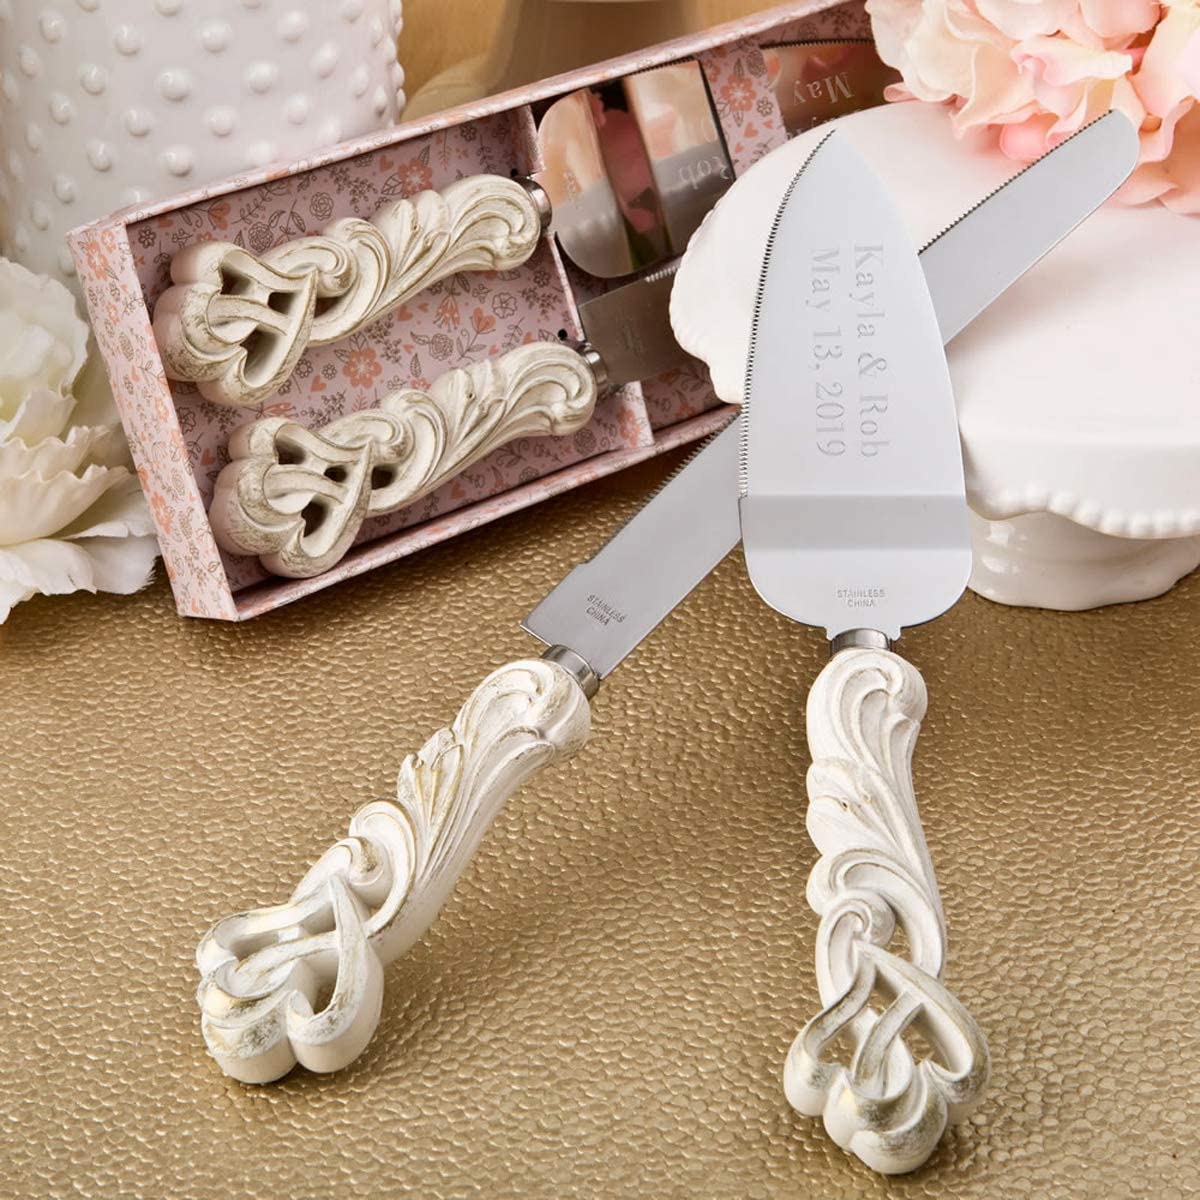 GIFTS INFINITY - Personalized Wedding Cake Knife and Server Set, Free Engraving – Plastic